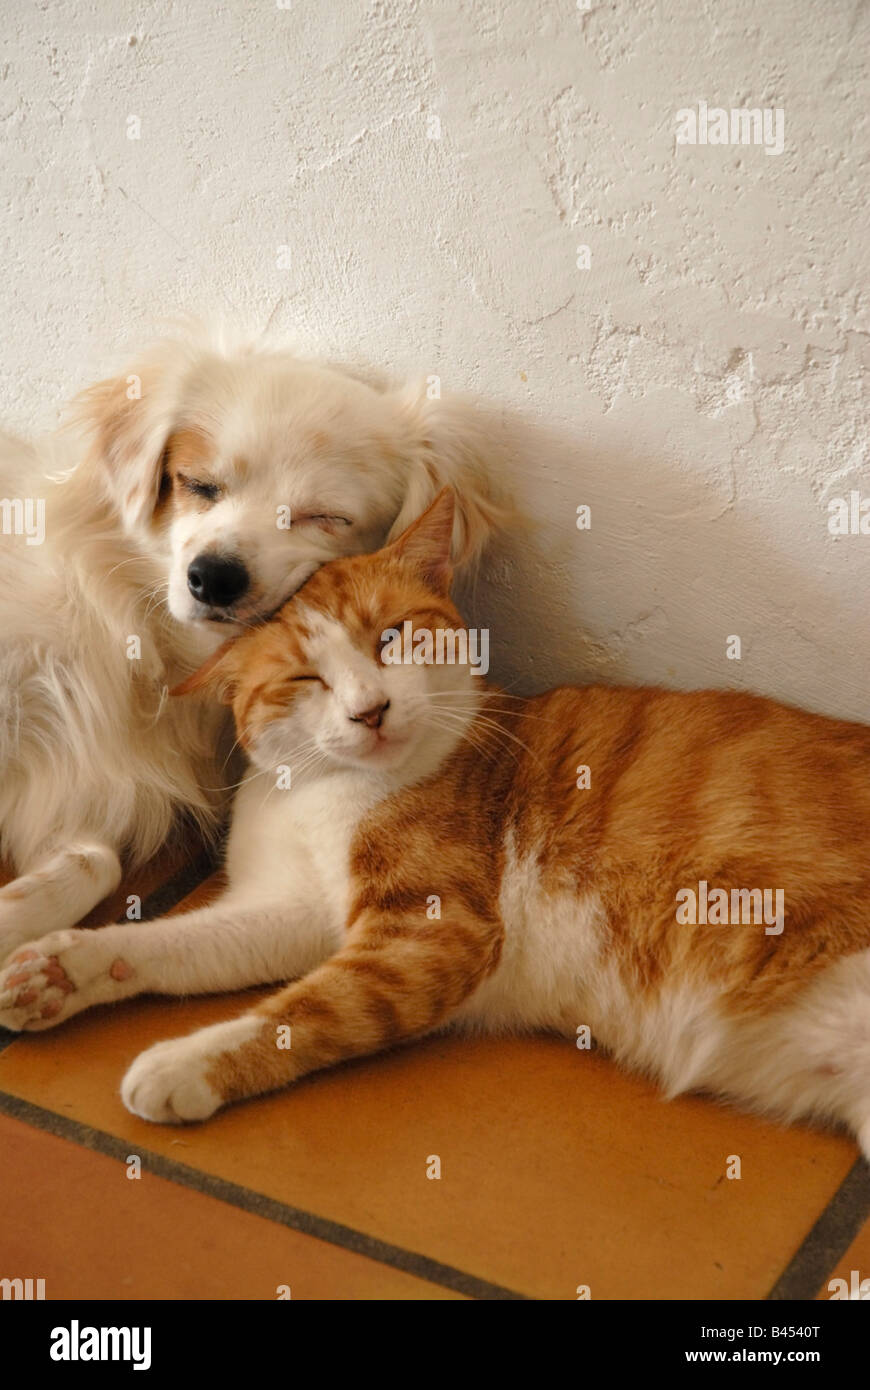 Ginger cat and small white dog sleeping close together on floor Stock Photo